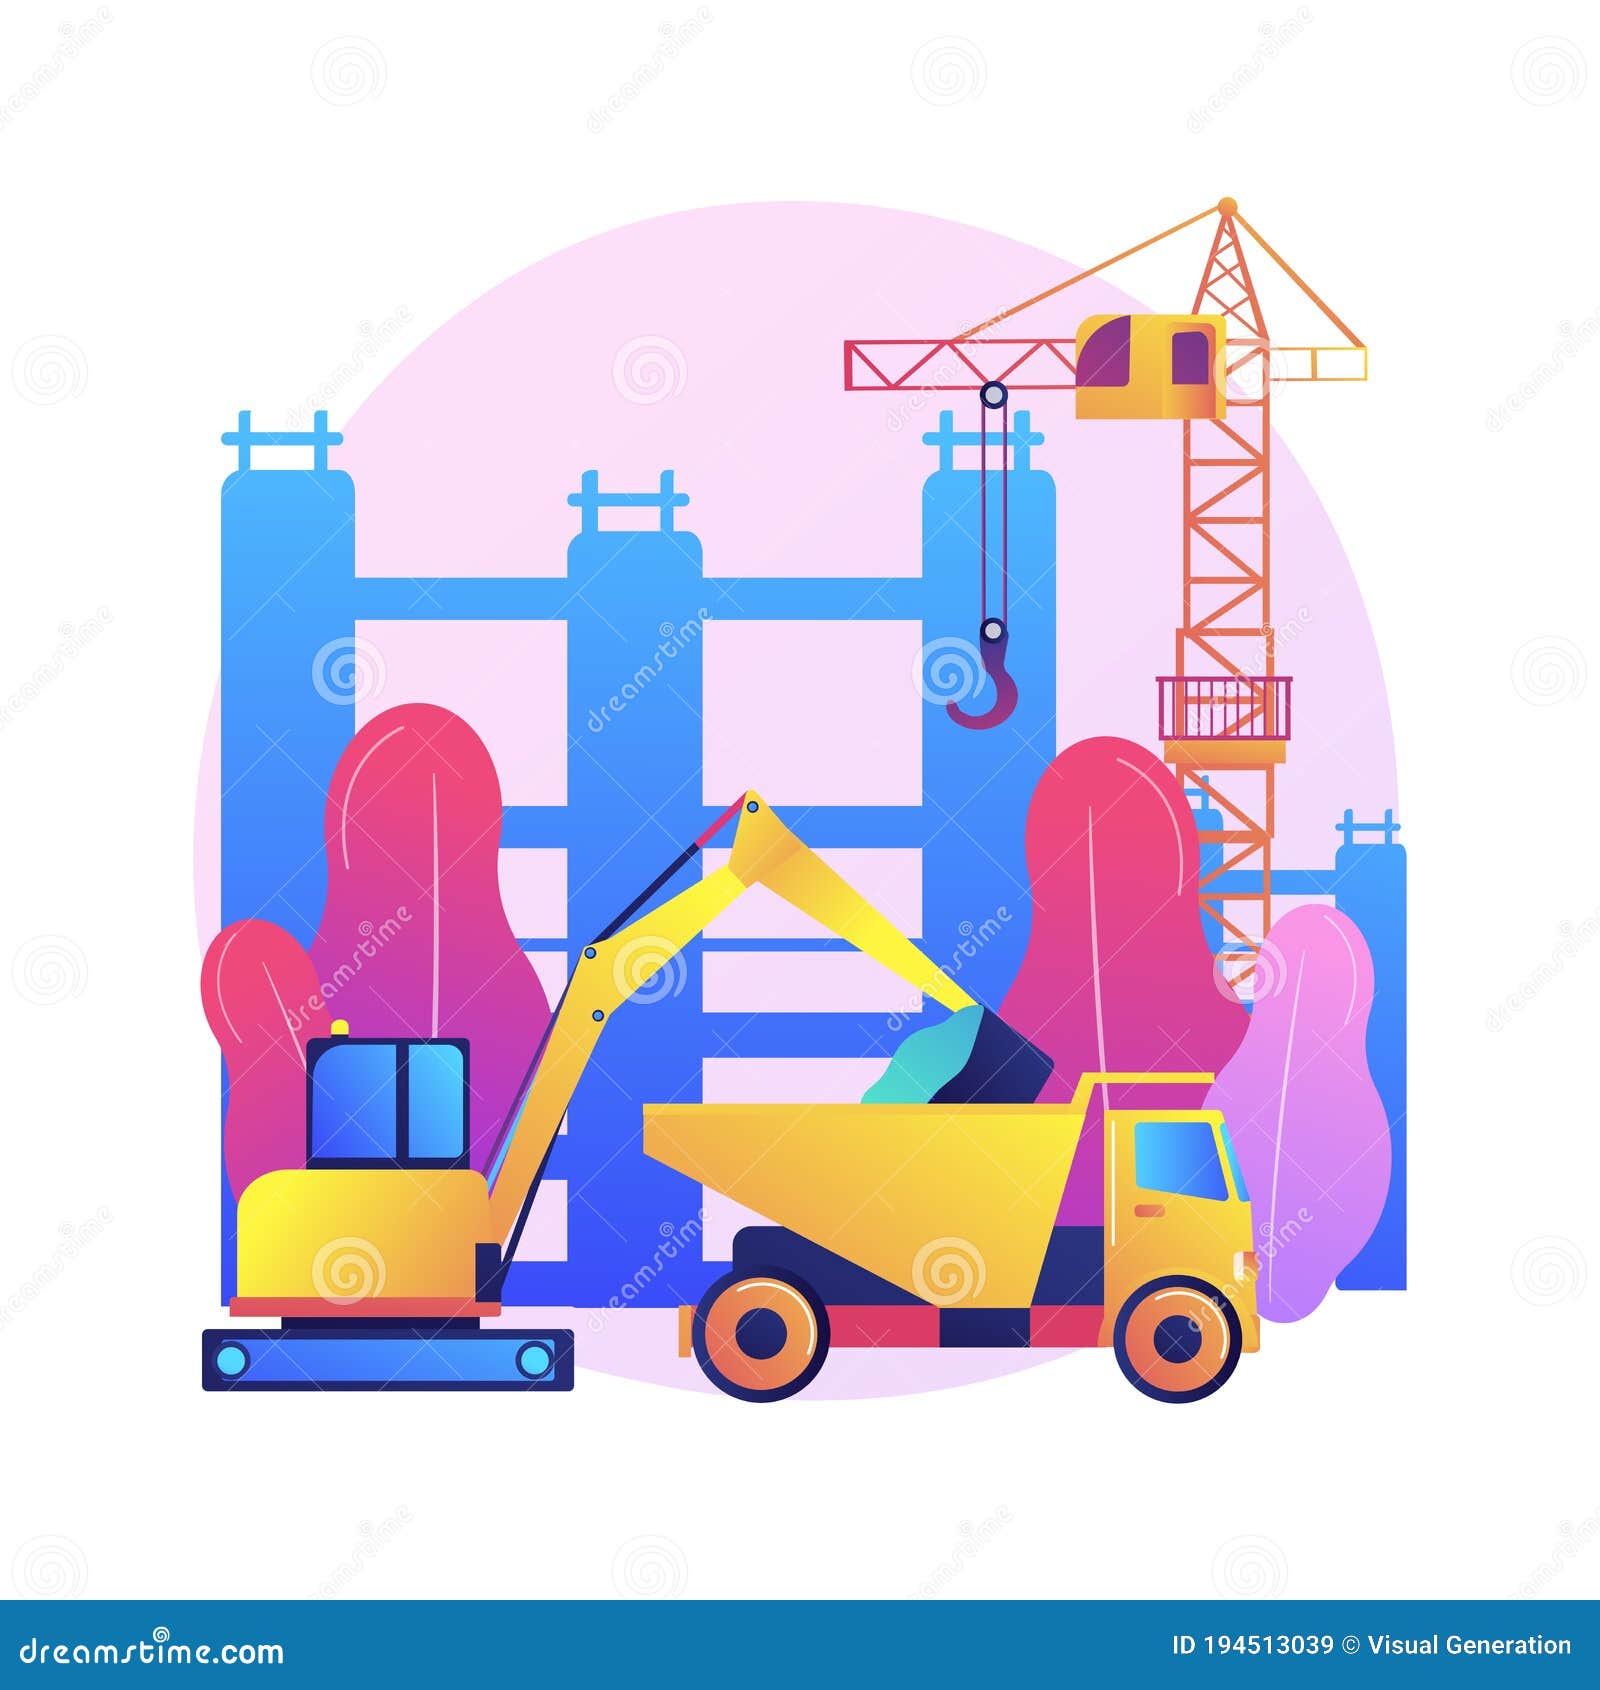 Modern Construction Machinery Abstract Concept Vector Illustration Stock Vector Illustration Of Maintaining Industrial 194513039